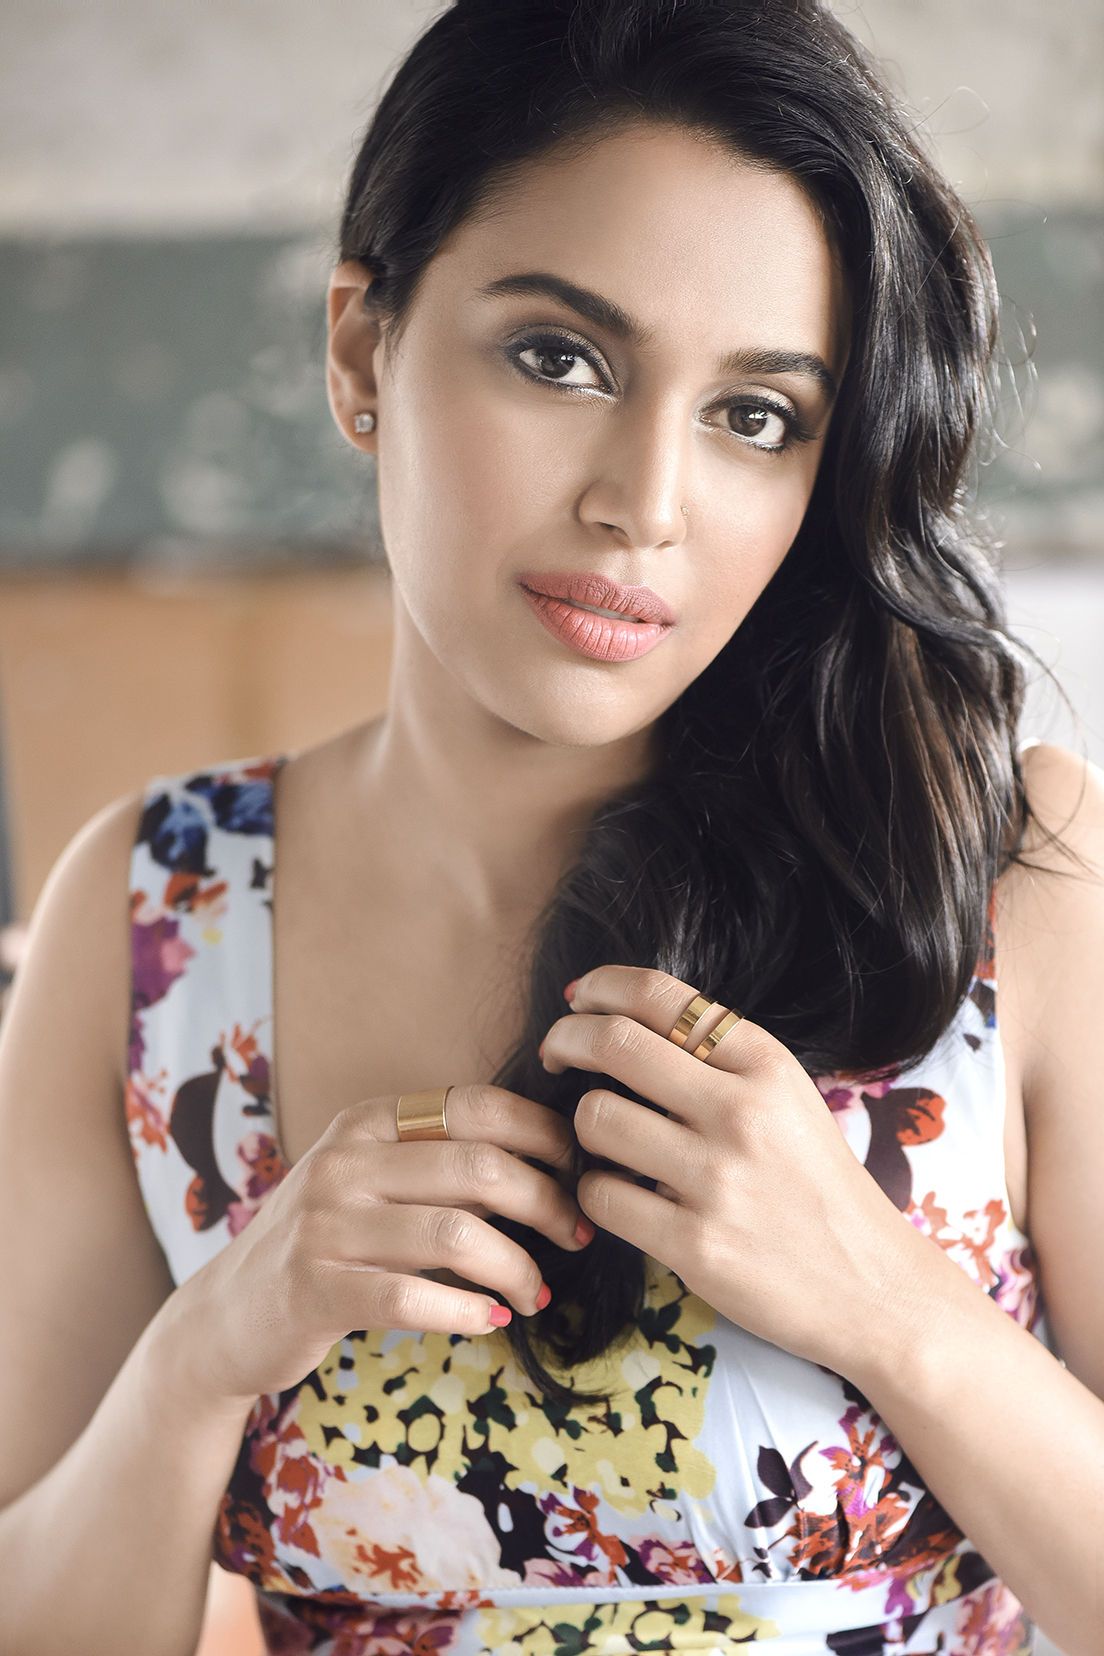 women s safety has become a crisis in india says swara bhaskar